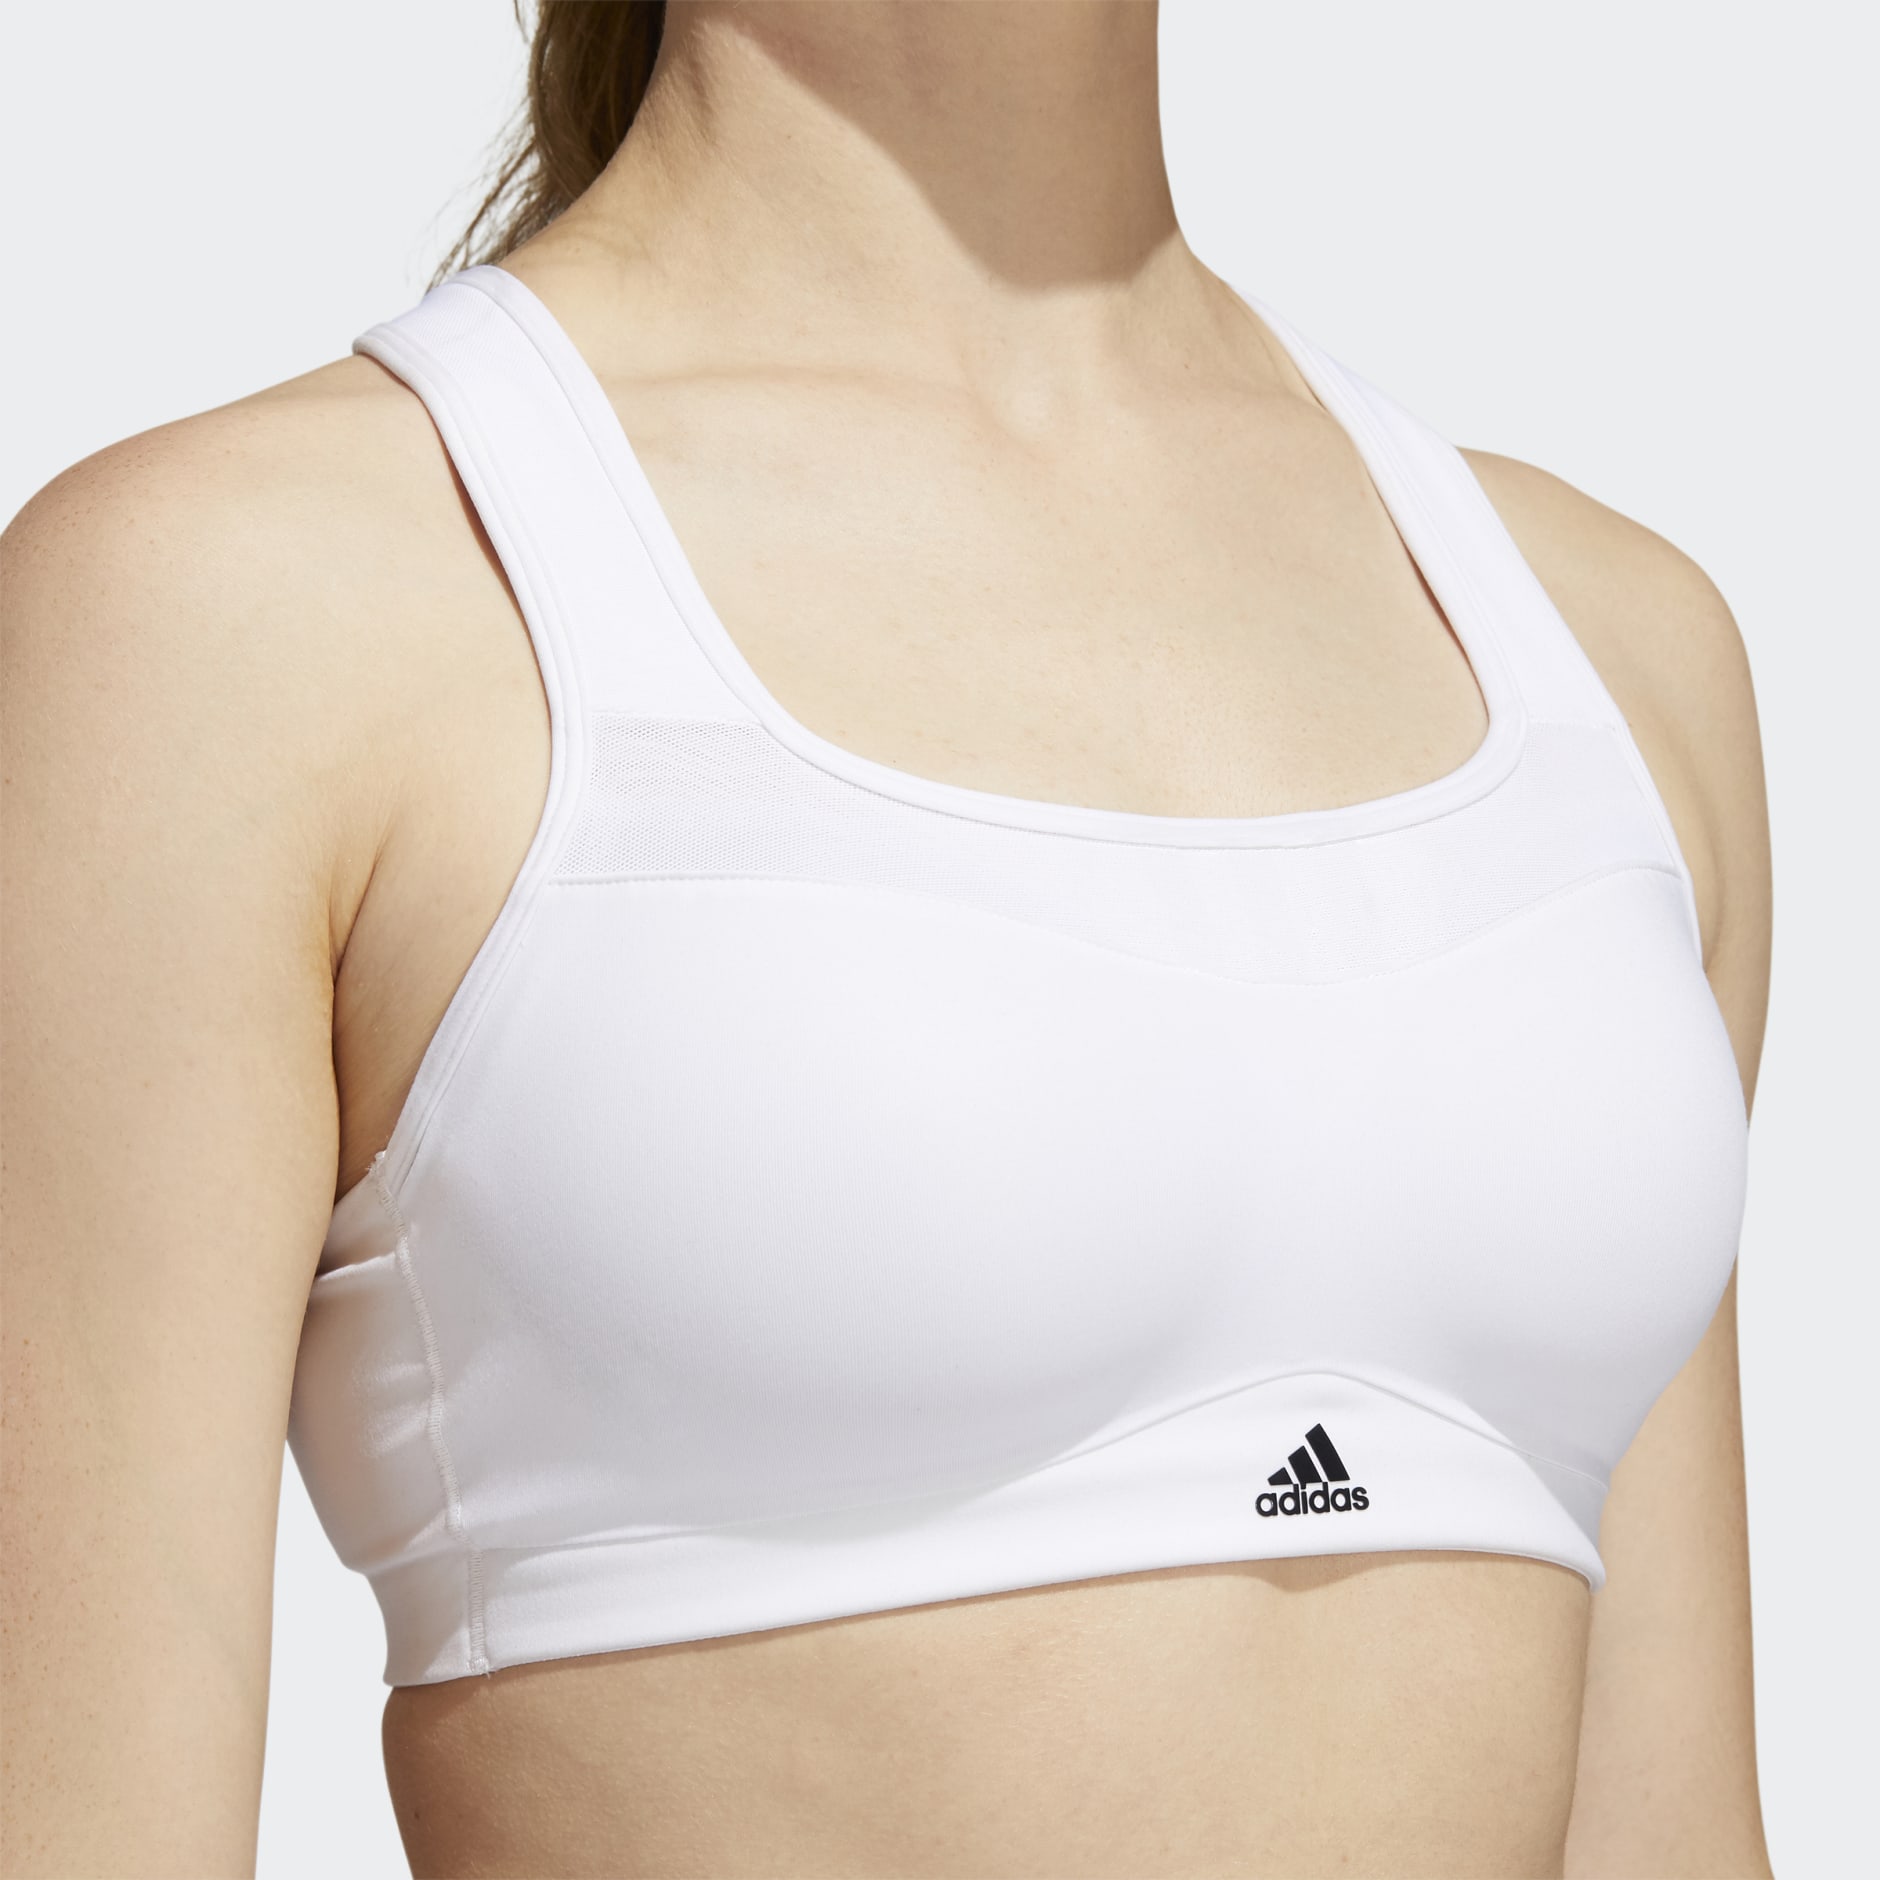 adidas - TLRD Move Training High-Support Sports Bra Women black at